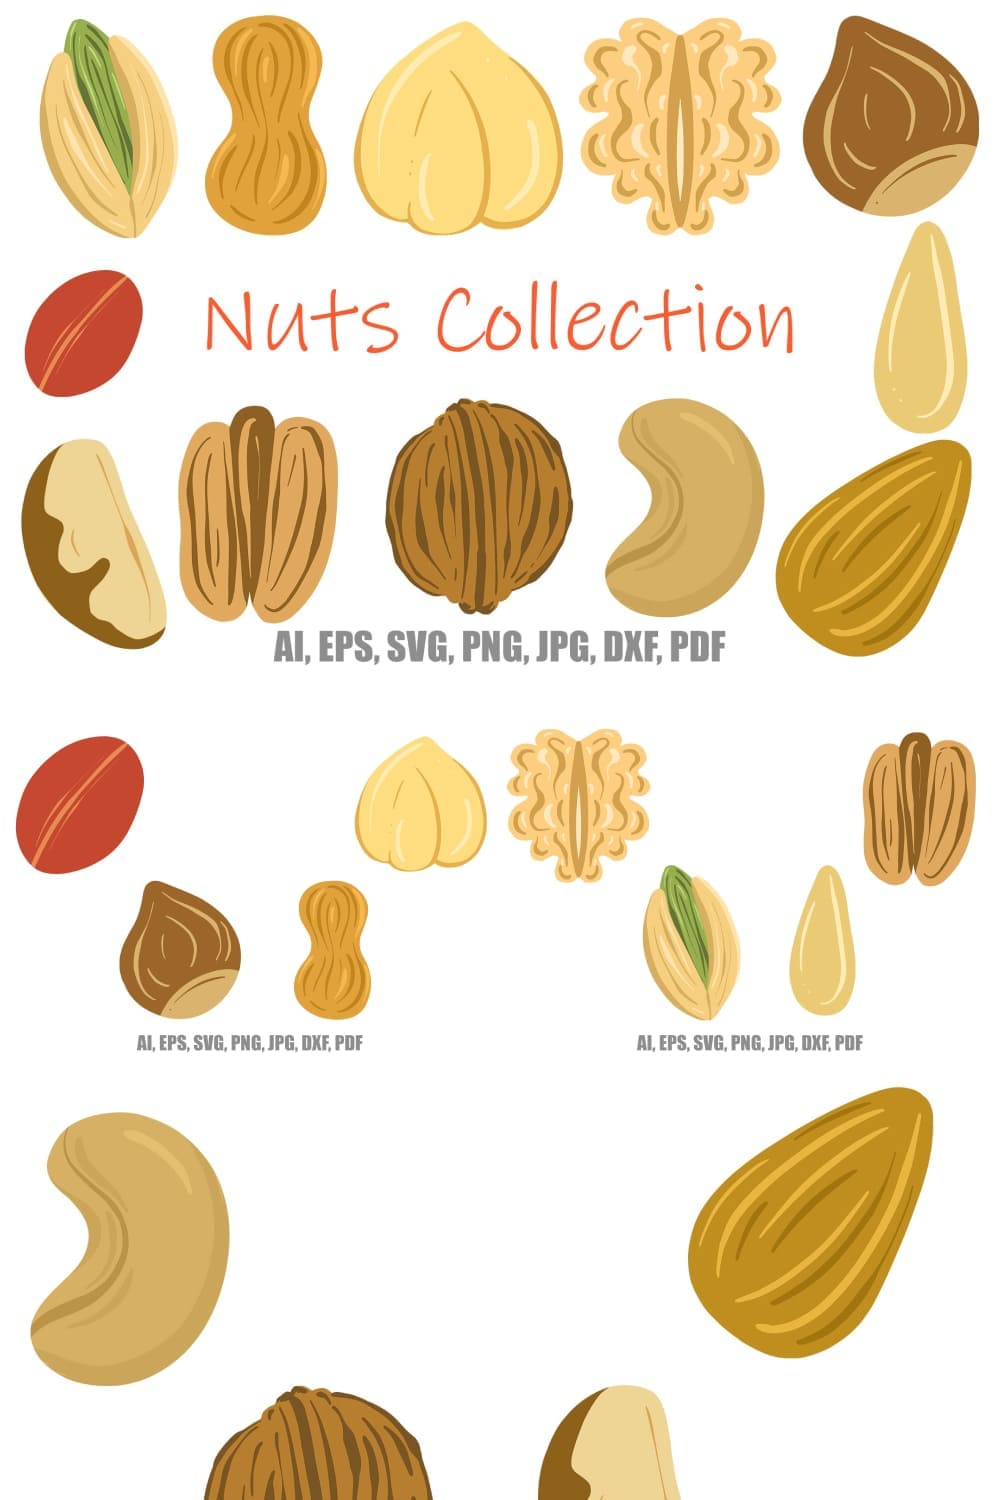 Collection nuts, seeds brazil walnut, cashew, pecan, almond, picture for Pinterest 1000x1500.